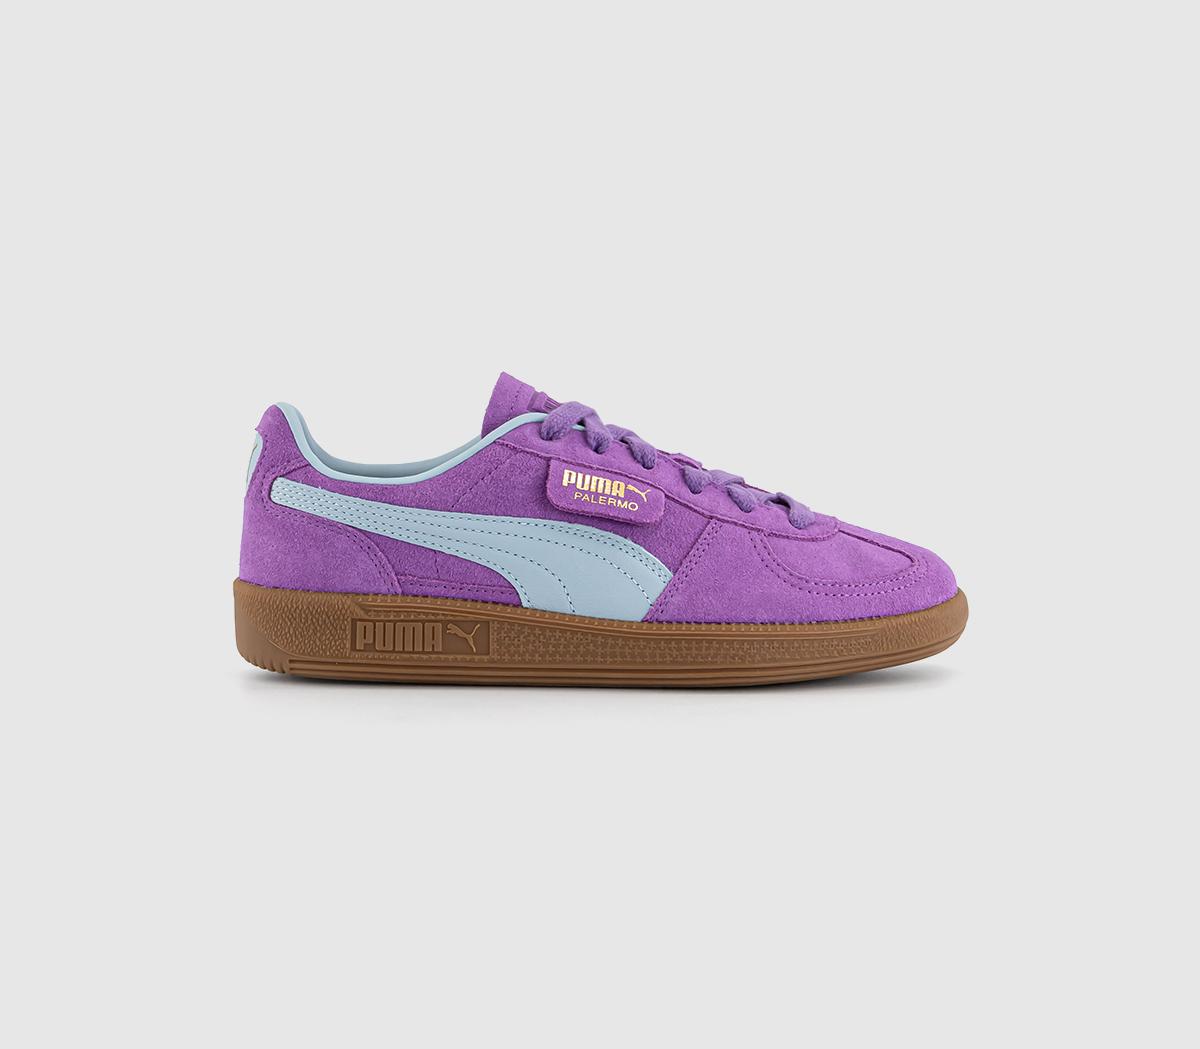 PUMAPalermo TrainersUltraviolet Turquoise Surf Gold